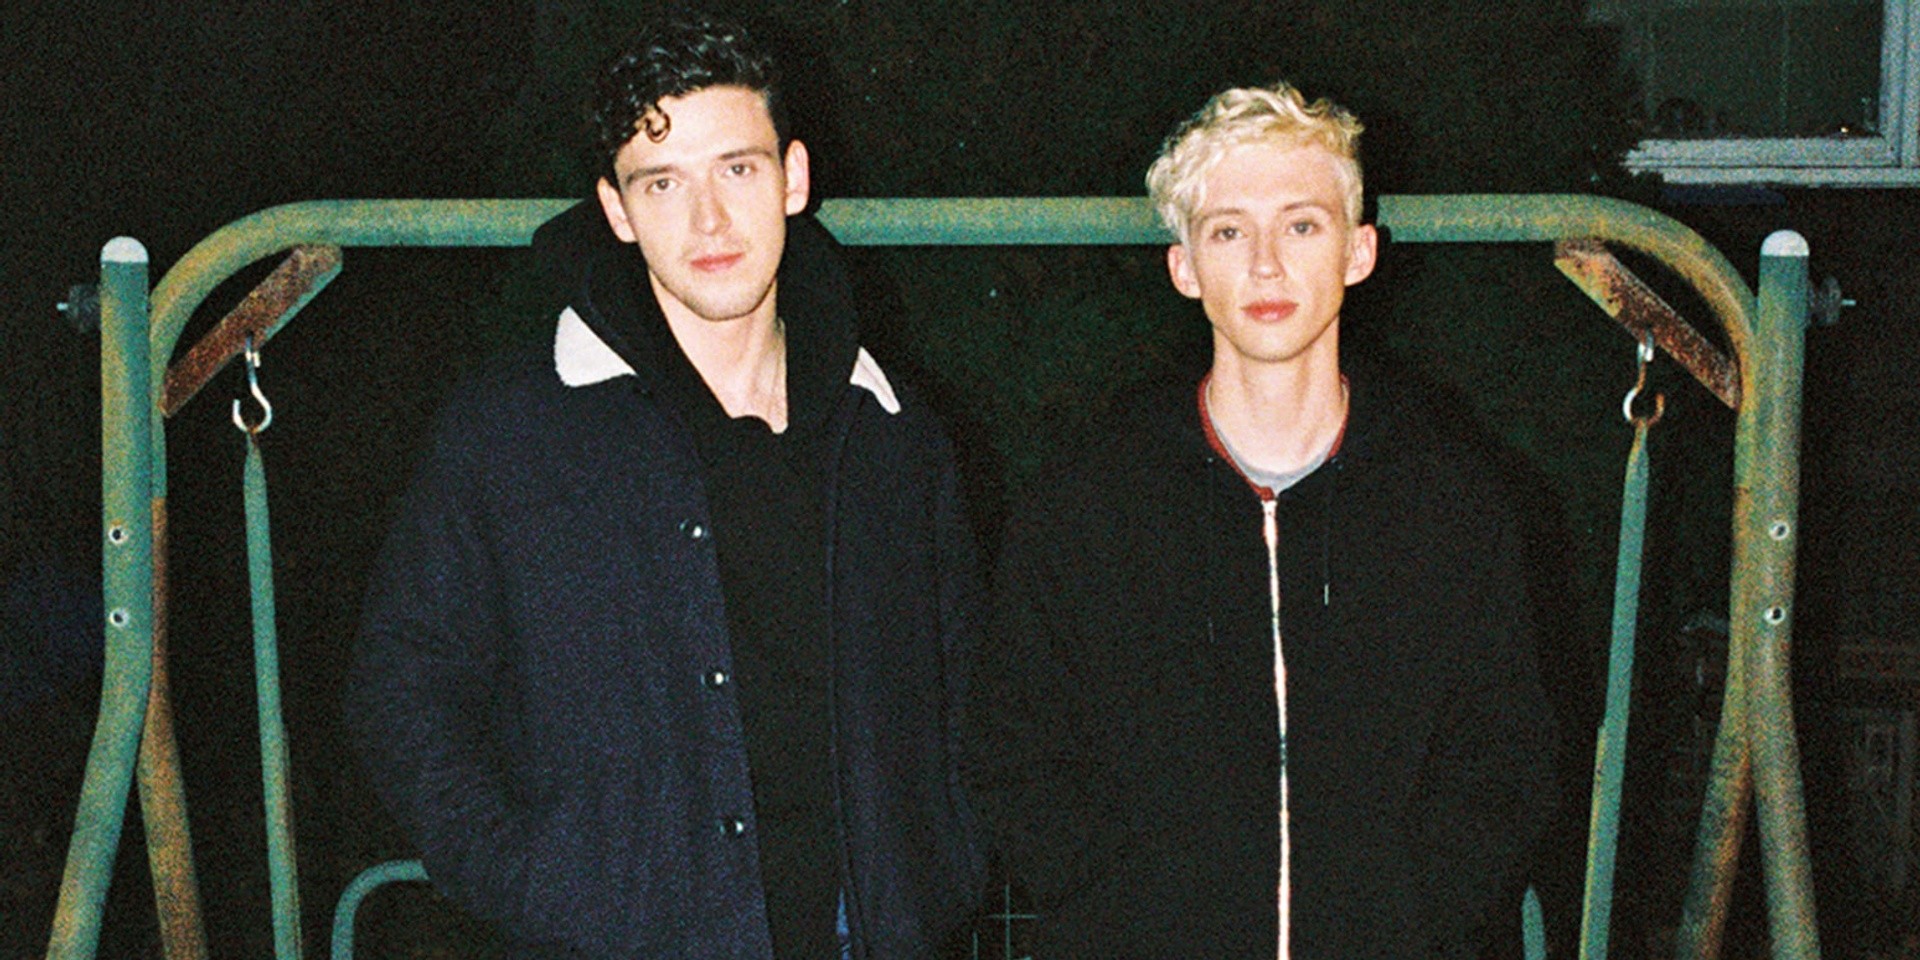 Lauv and Troye Sivan are love-scorned ghosts in music video for 'I'm So Tired..."